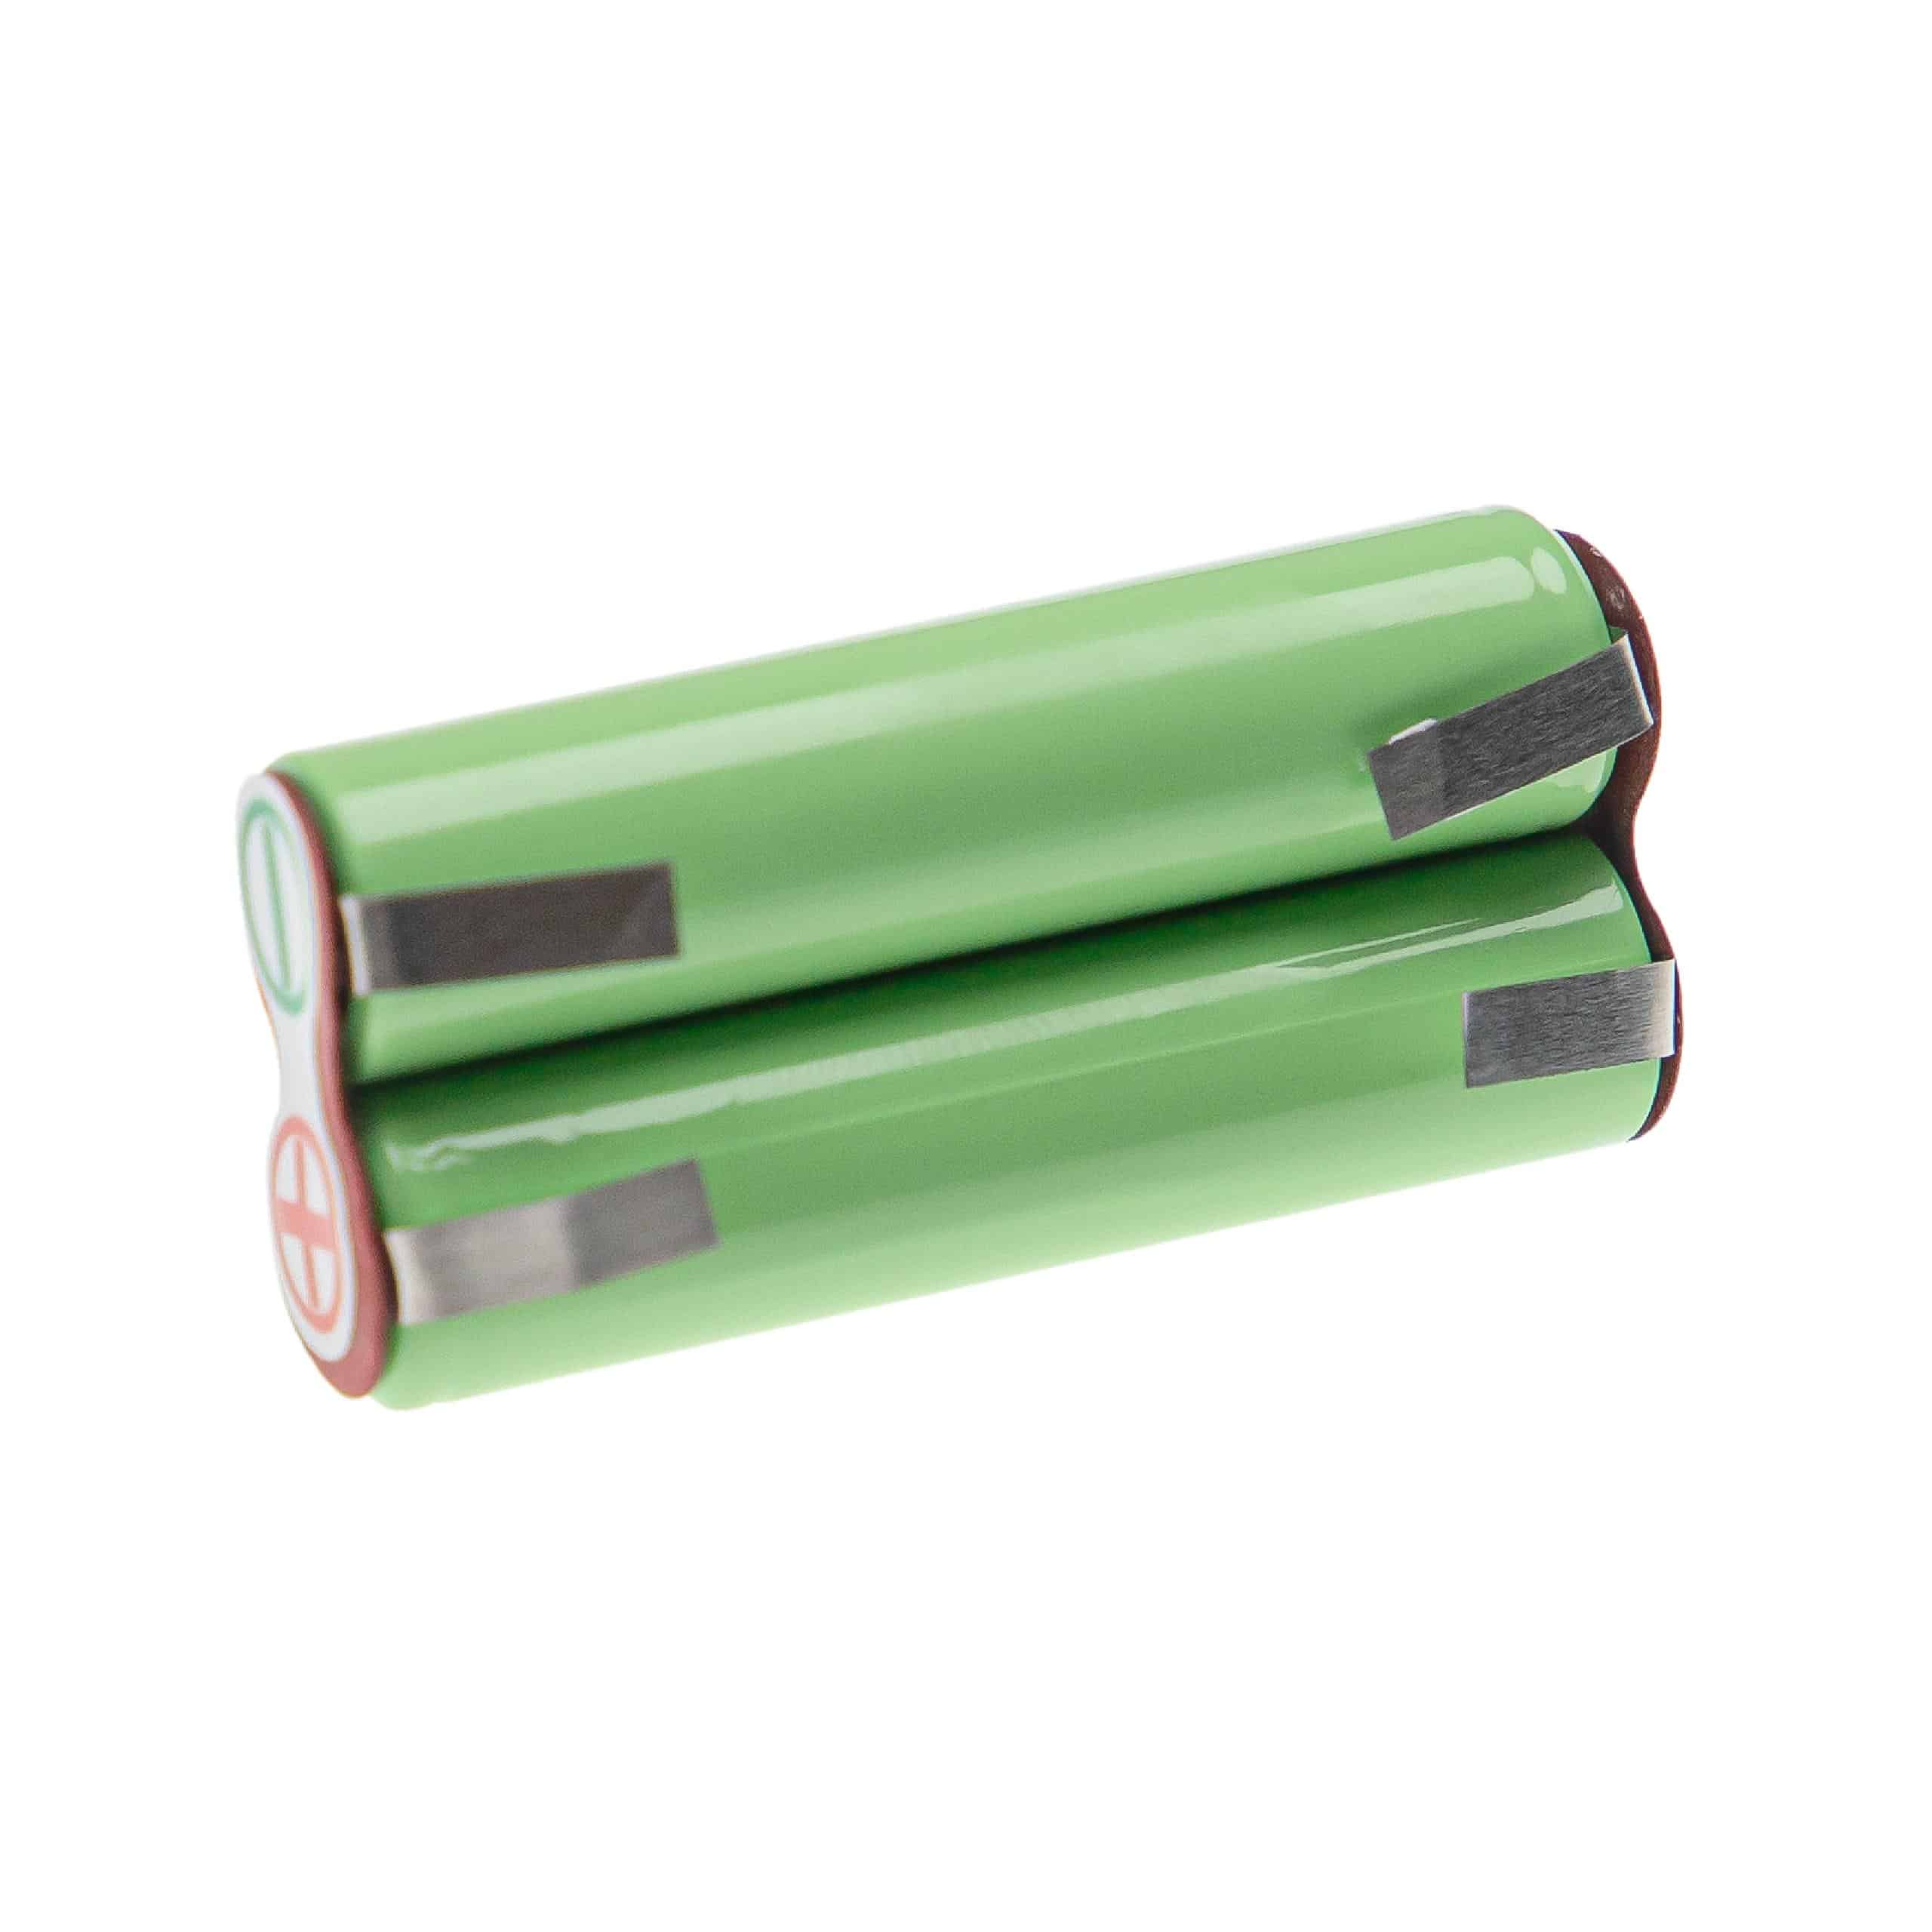 Electric Razor Battery Replacement for Braun Type 5417 - 950mAh 2.4V NiMH